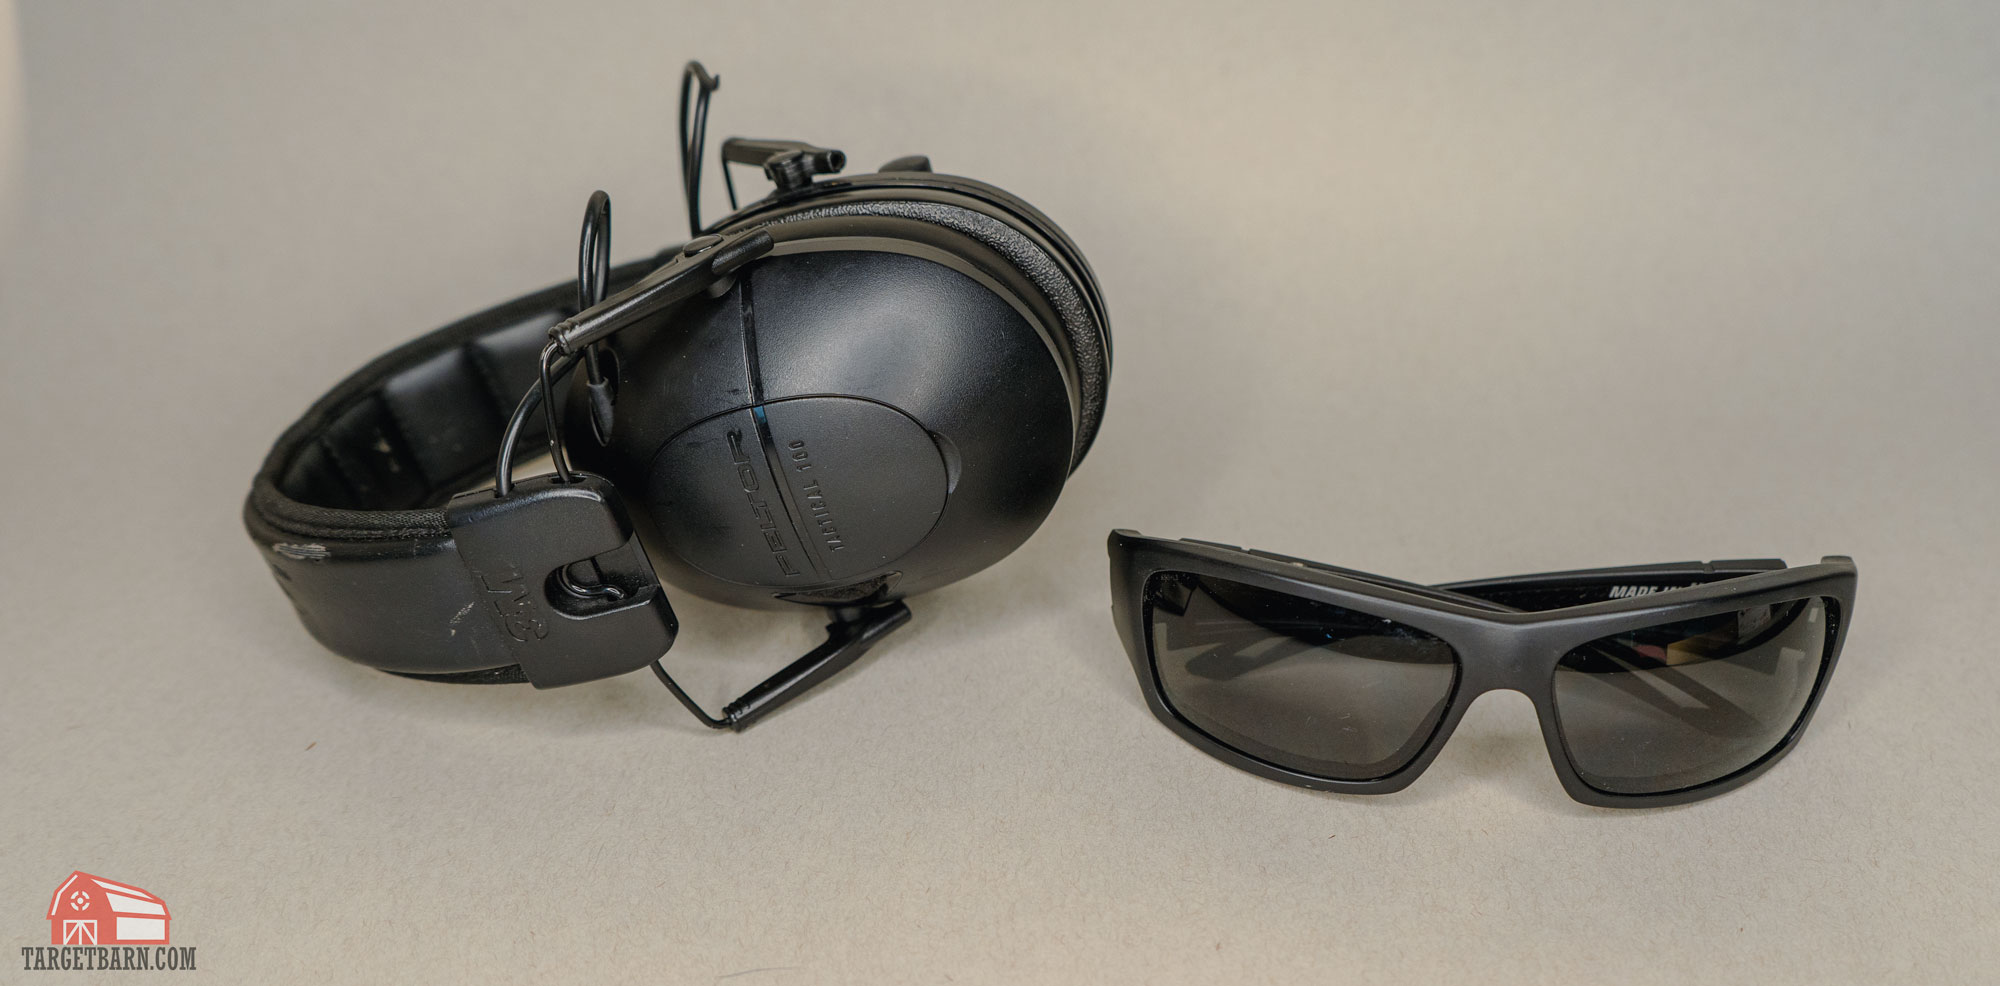 electronic ear protection and ballistic rated eye protection for the gun range